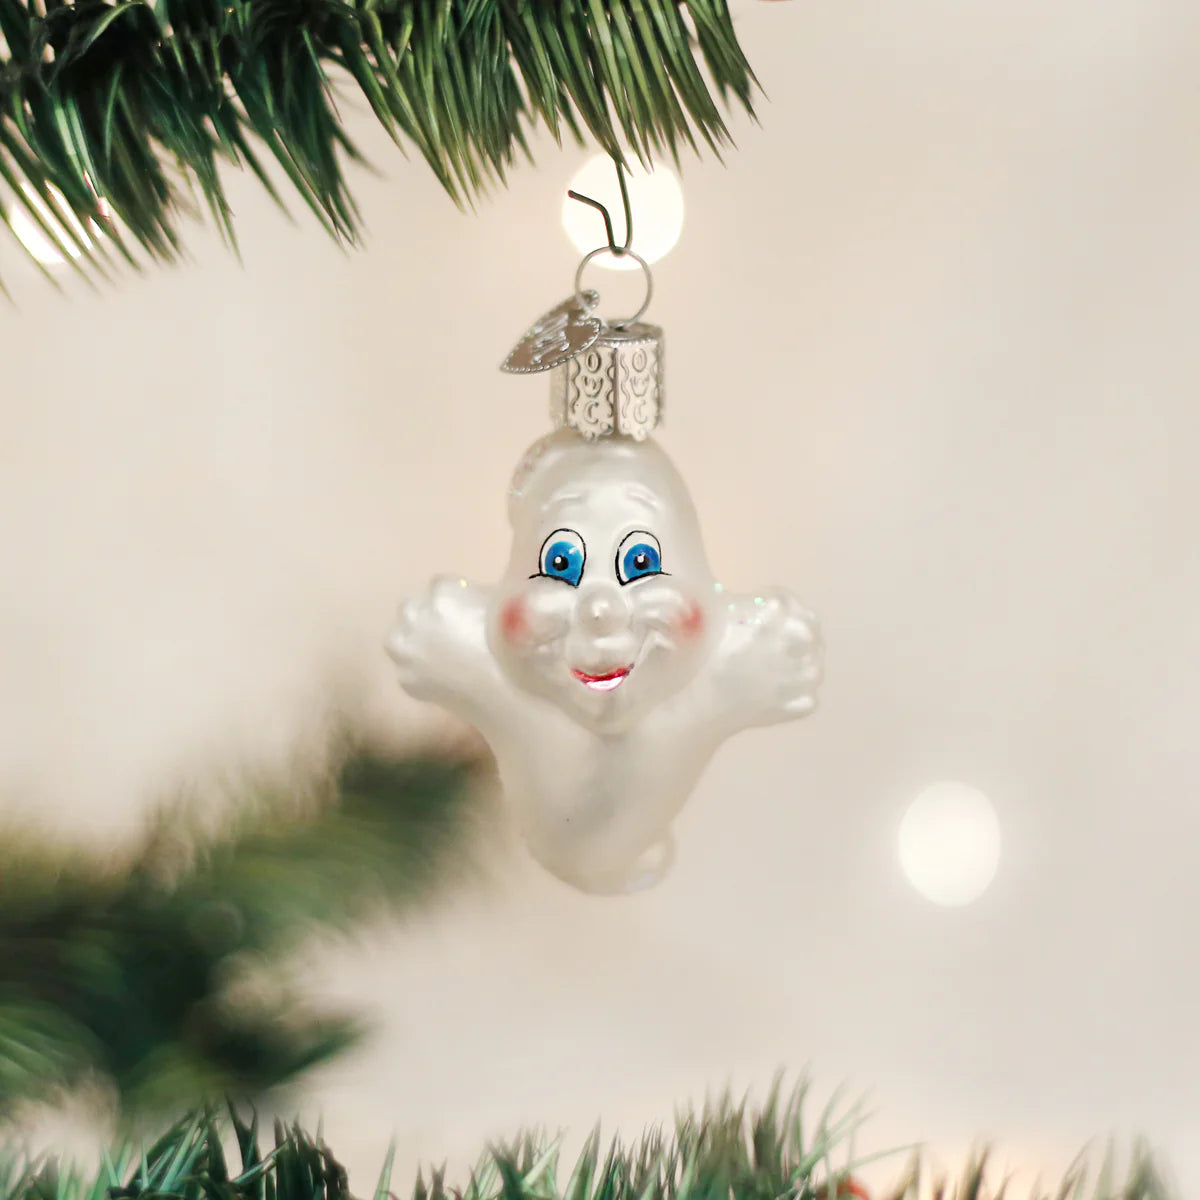 Old World Christmas - Miniature Ghost Ornament